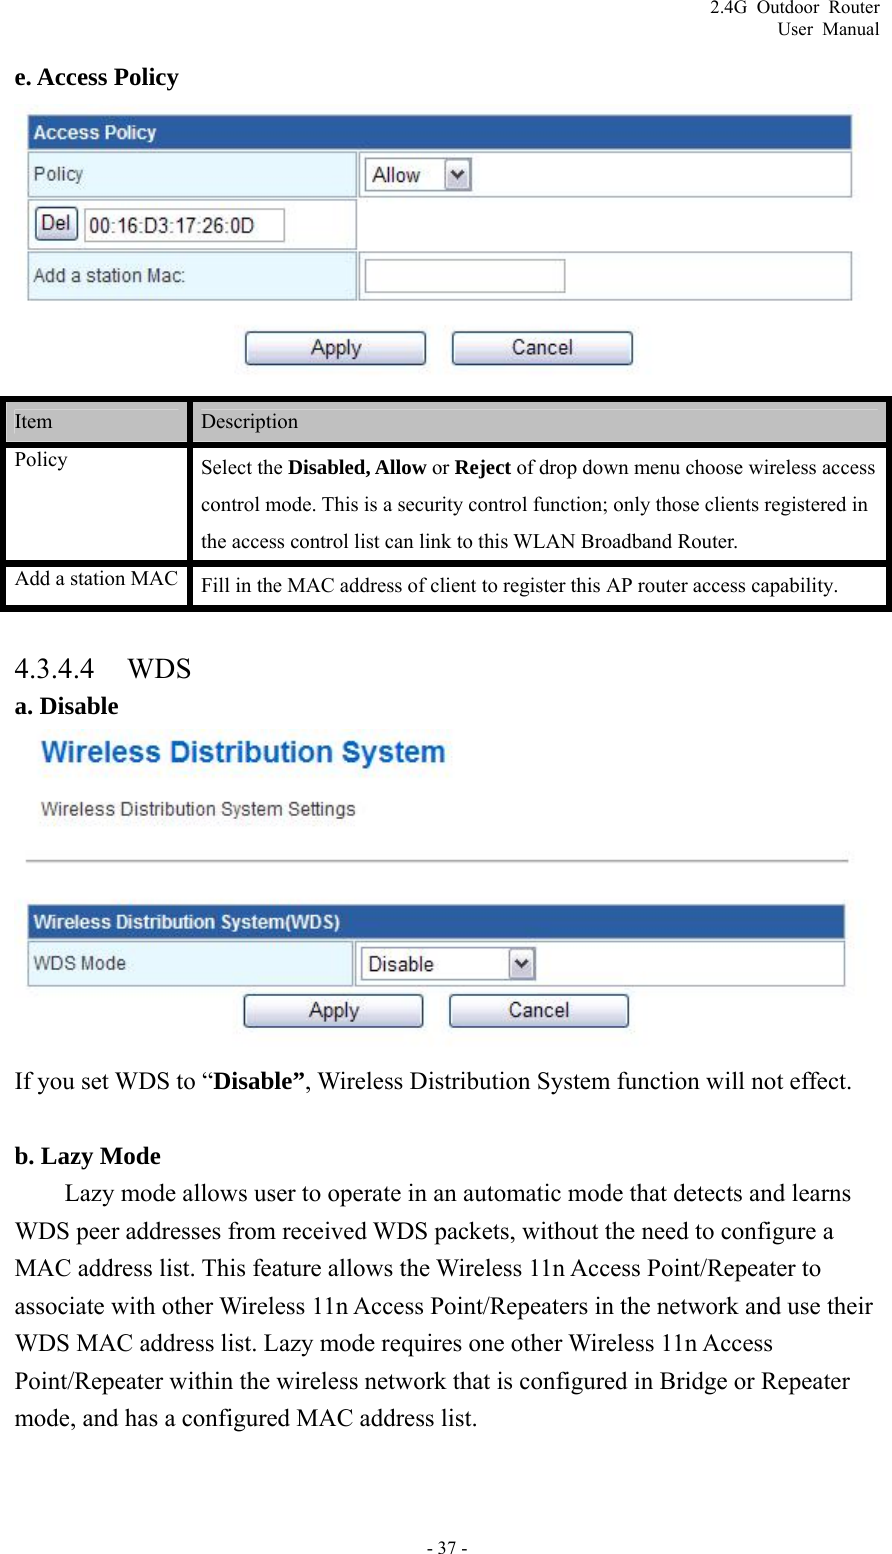 2.4G Outdoor Router User Manual e. Access Policy  Item   Description  Policy Select the Disabled, Allow or Reject of drop down menu choose wireless access control mode. This is a security control function; only those clients registered in the access control list can link to this WLAN Broadband Router. Add a station MAC  Fill in the MAC address of client to register this AP router access capability.  4.3.4.4 WDS a. Disable  If you set WDS to “Disable”, Wireless Distribution System function will not effect.  b. Lazy Mode Lazy mode allows user to operate in an automatic mode that detects and learns WDS peer addresses from received WDS packets, without the need to configure a MAC address list. This feature allows the Wireless 11n Access Point/Repeater to associate with other Wireless 11n Access Point/Repeaters in the network and use their WDS MAC address list. Lazy mode requires one other Wireless 11n Access Point/Repeater within the wireless network that is configured in Bridge or Repeater mode, and has a configured MAC address list. - 37 - 